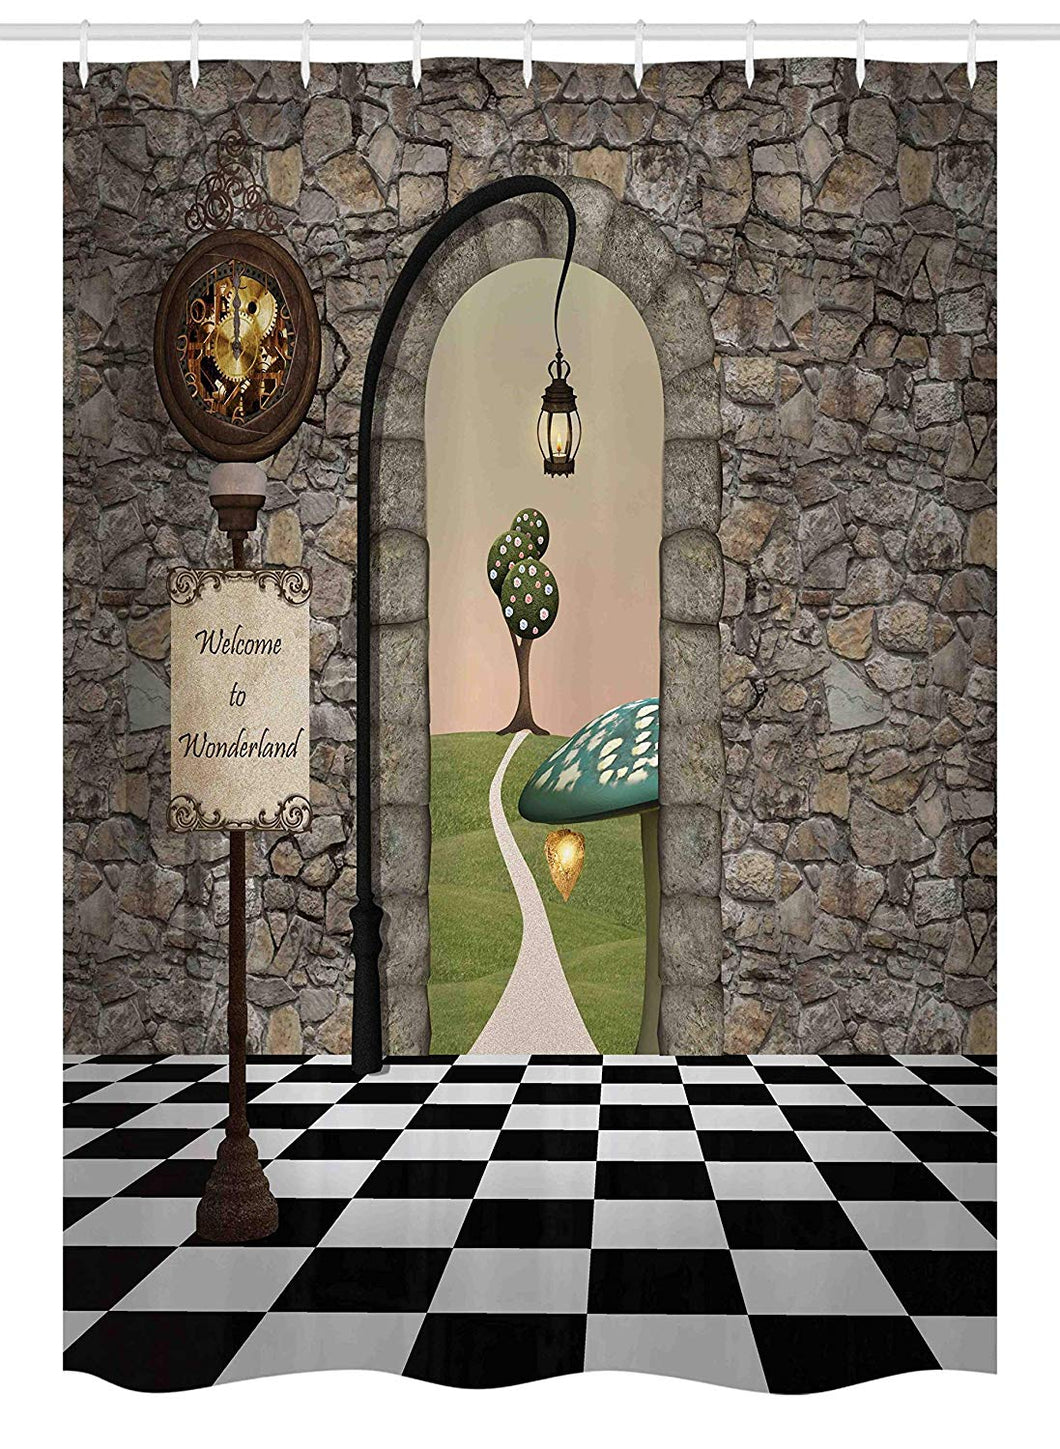 Ambesonne Alice in Wonderland Stall Shower Curtain, Welcome Wonderland Black and White Floor Landscape Mushroom Lantern, Fabric Bathroom Decor Set with Hooks, 54 W x 78 L Inches, Multicolor